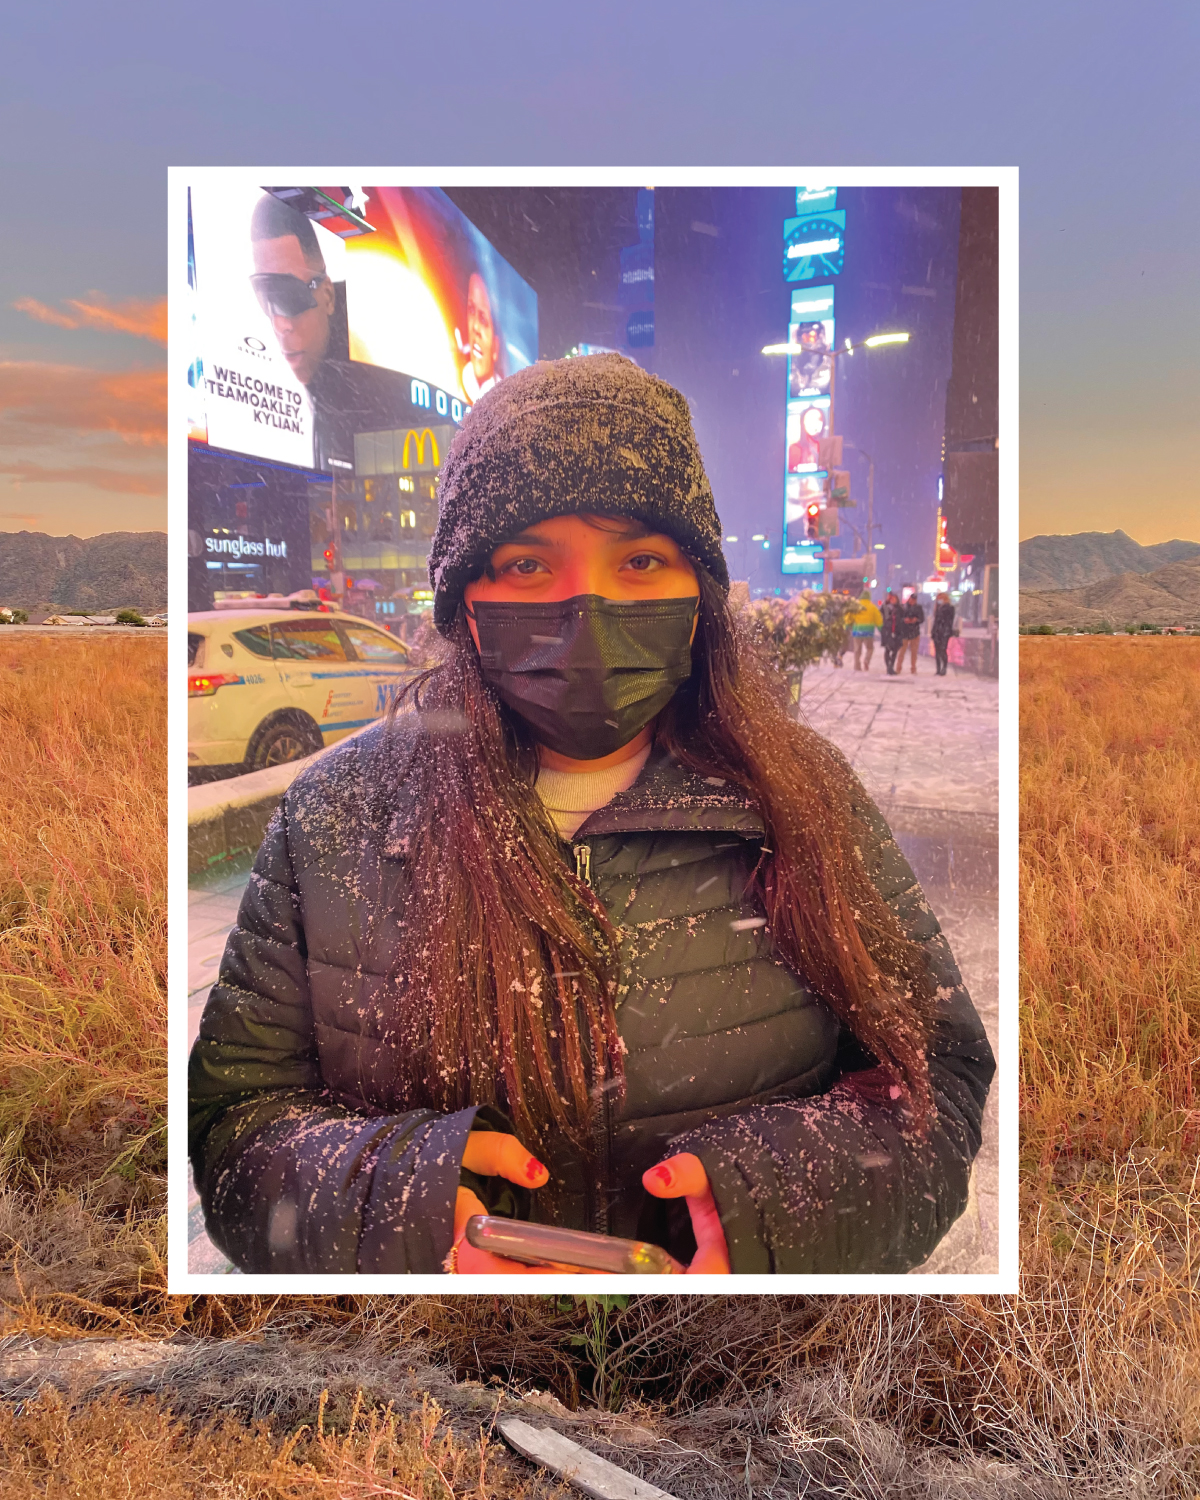 NYU scholarship recipient Kaeley Rice in a winter jacket at Times Square.